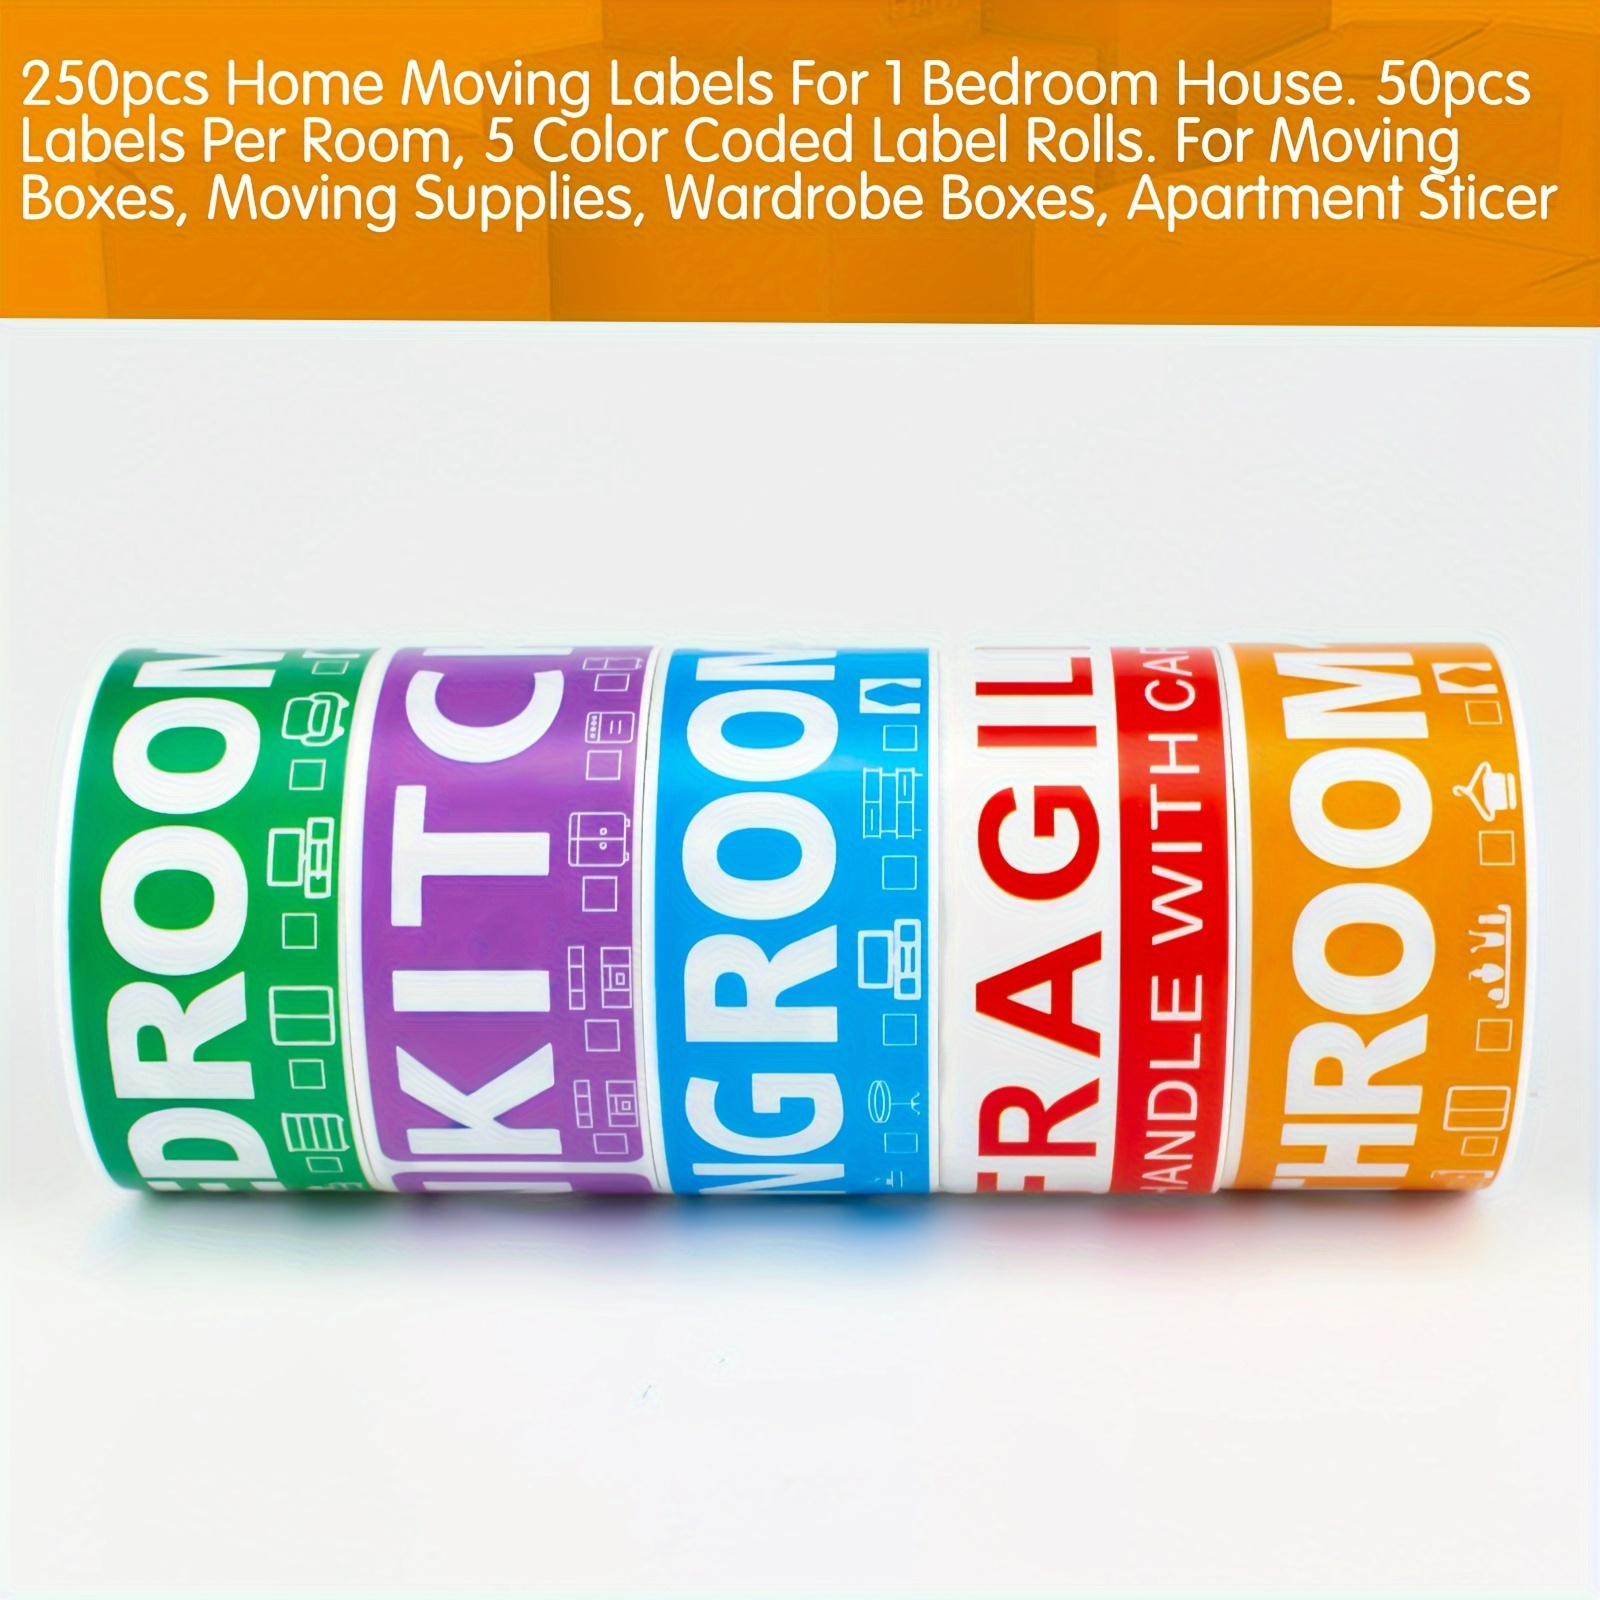 

250pcs Home Moving Labels Set - 5 Color-coded Rolls For 1 Bedroom House With English Text - Perfect For Organizing Boxes & Supplies During Relocation